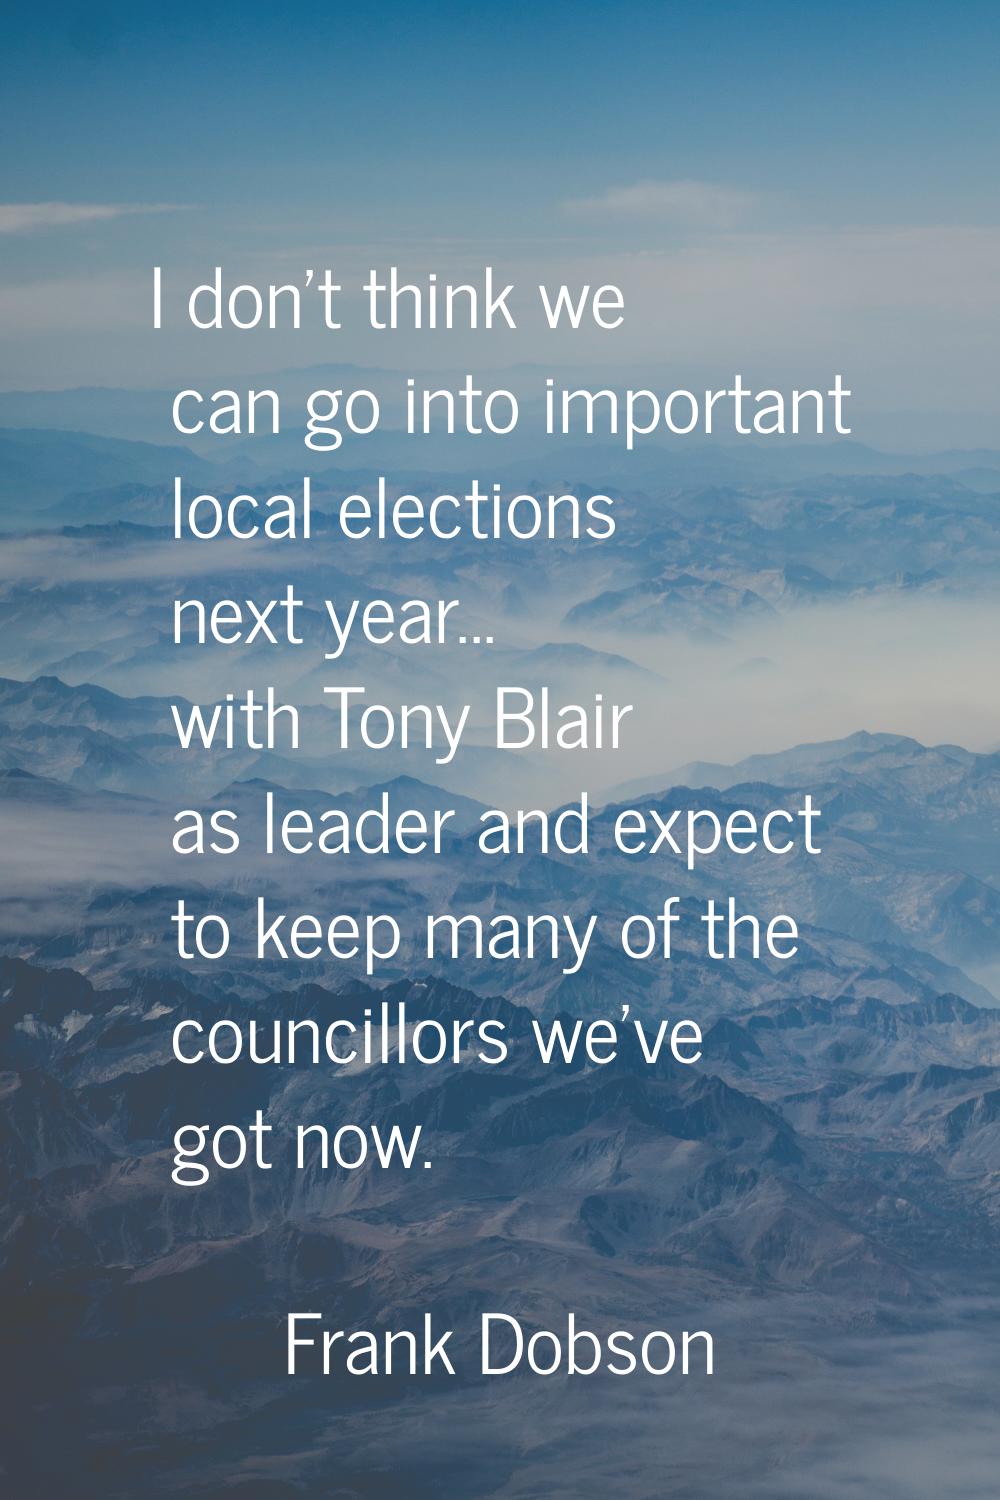 I don't think we can go into important local elections next year... with Tony Blair as leader and e